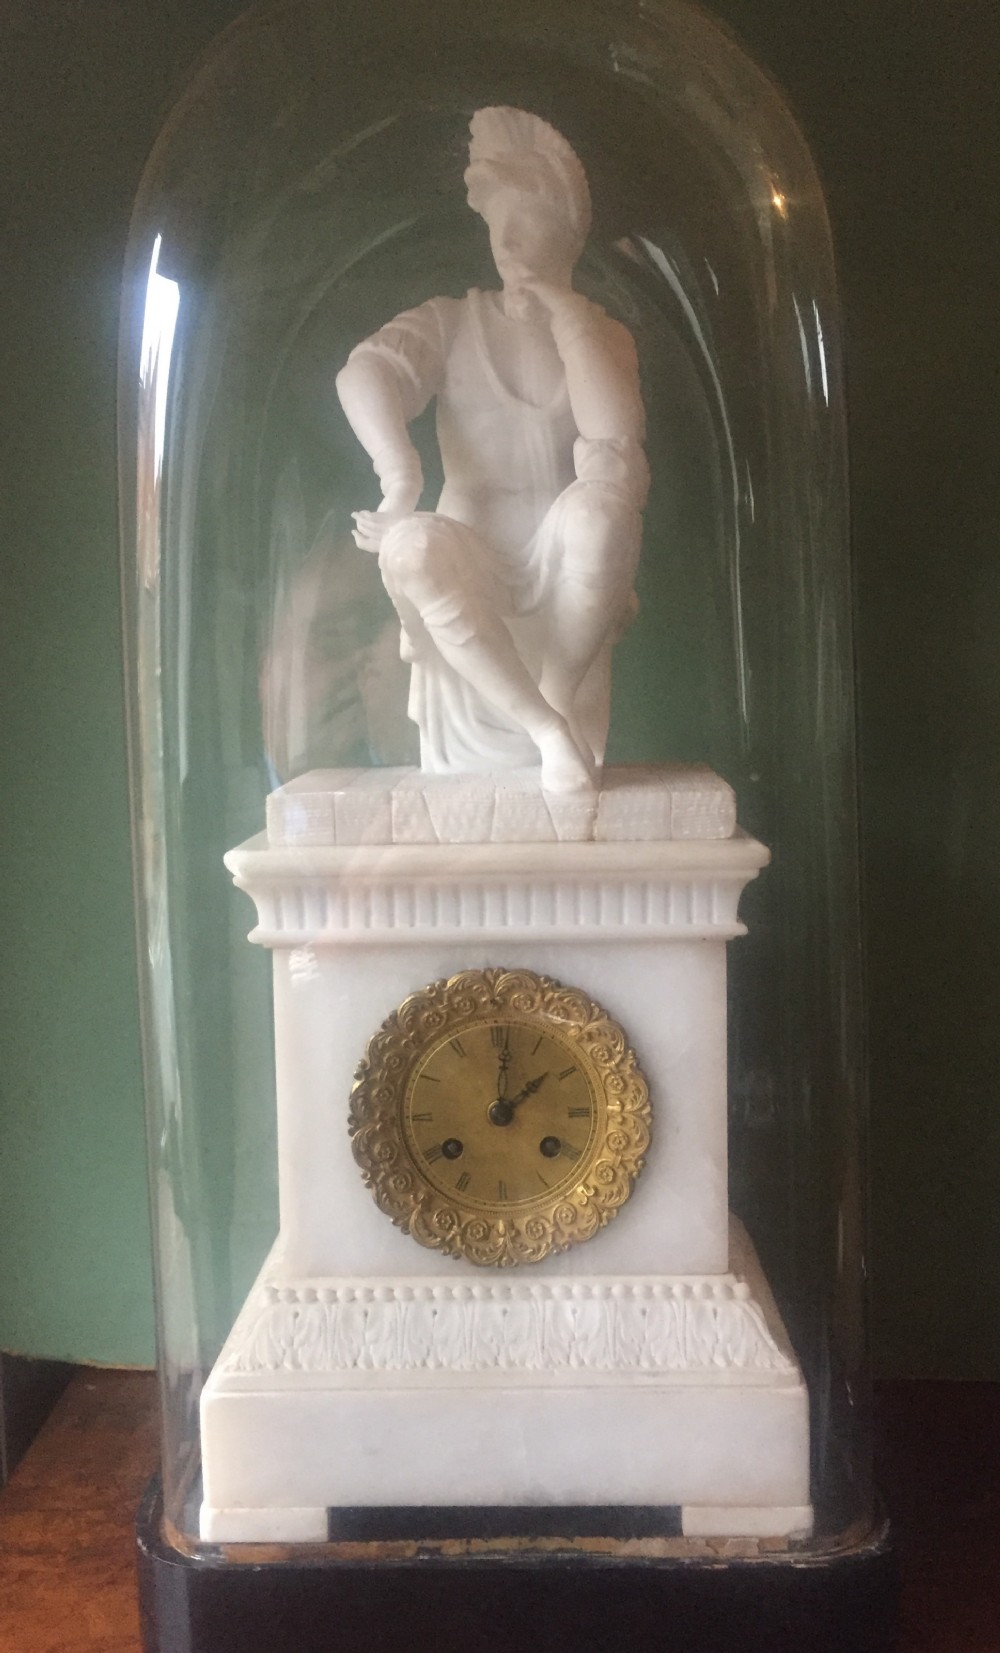 c19th italian carved alabaster mantel clock fitted with a french movement under glass dome